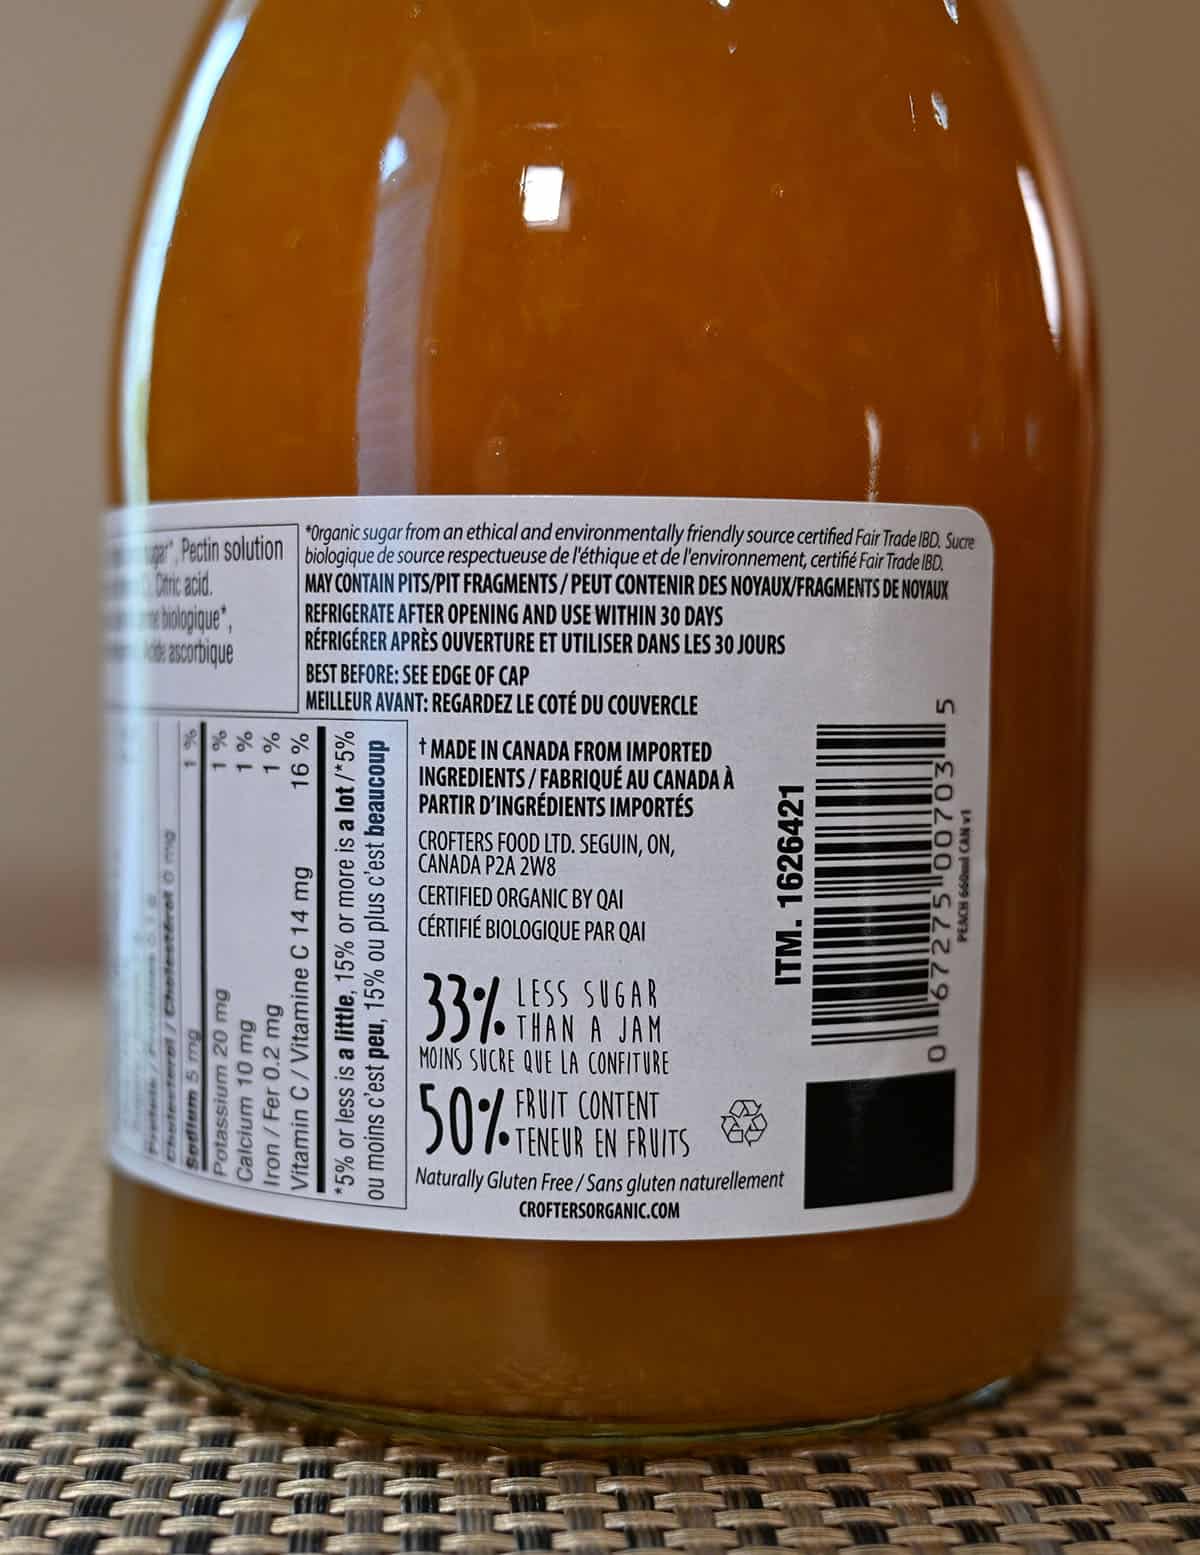 Image of the back of the jar of the peach spread.